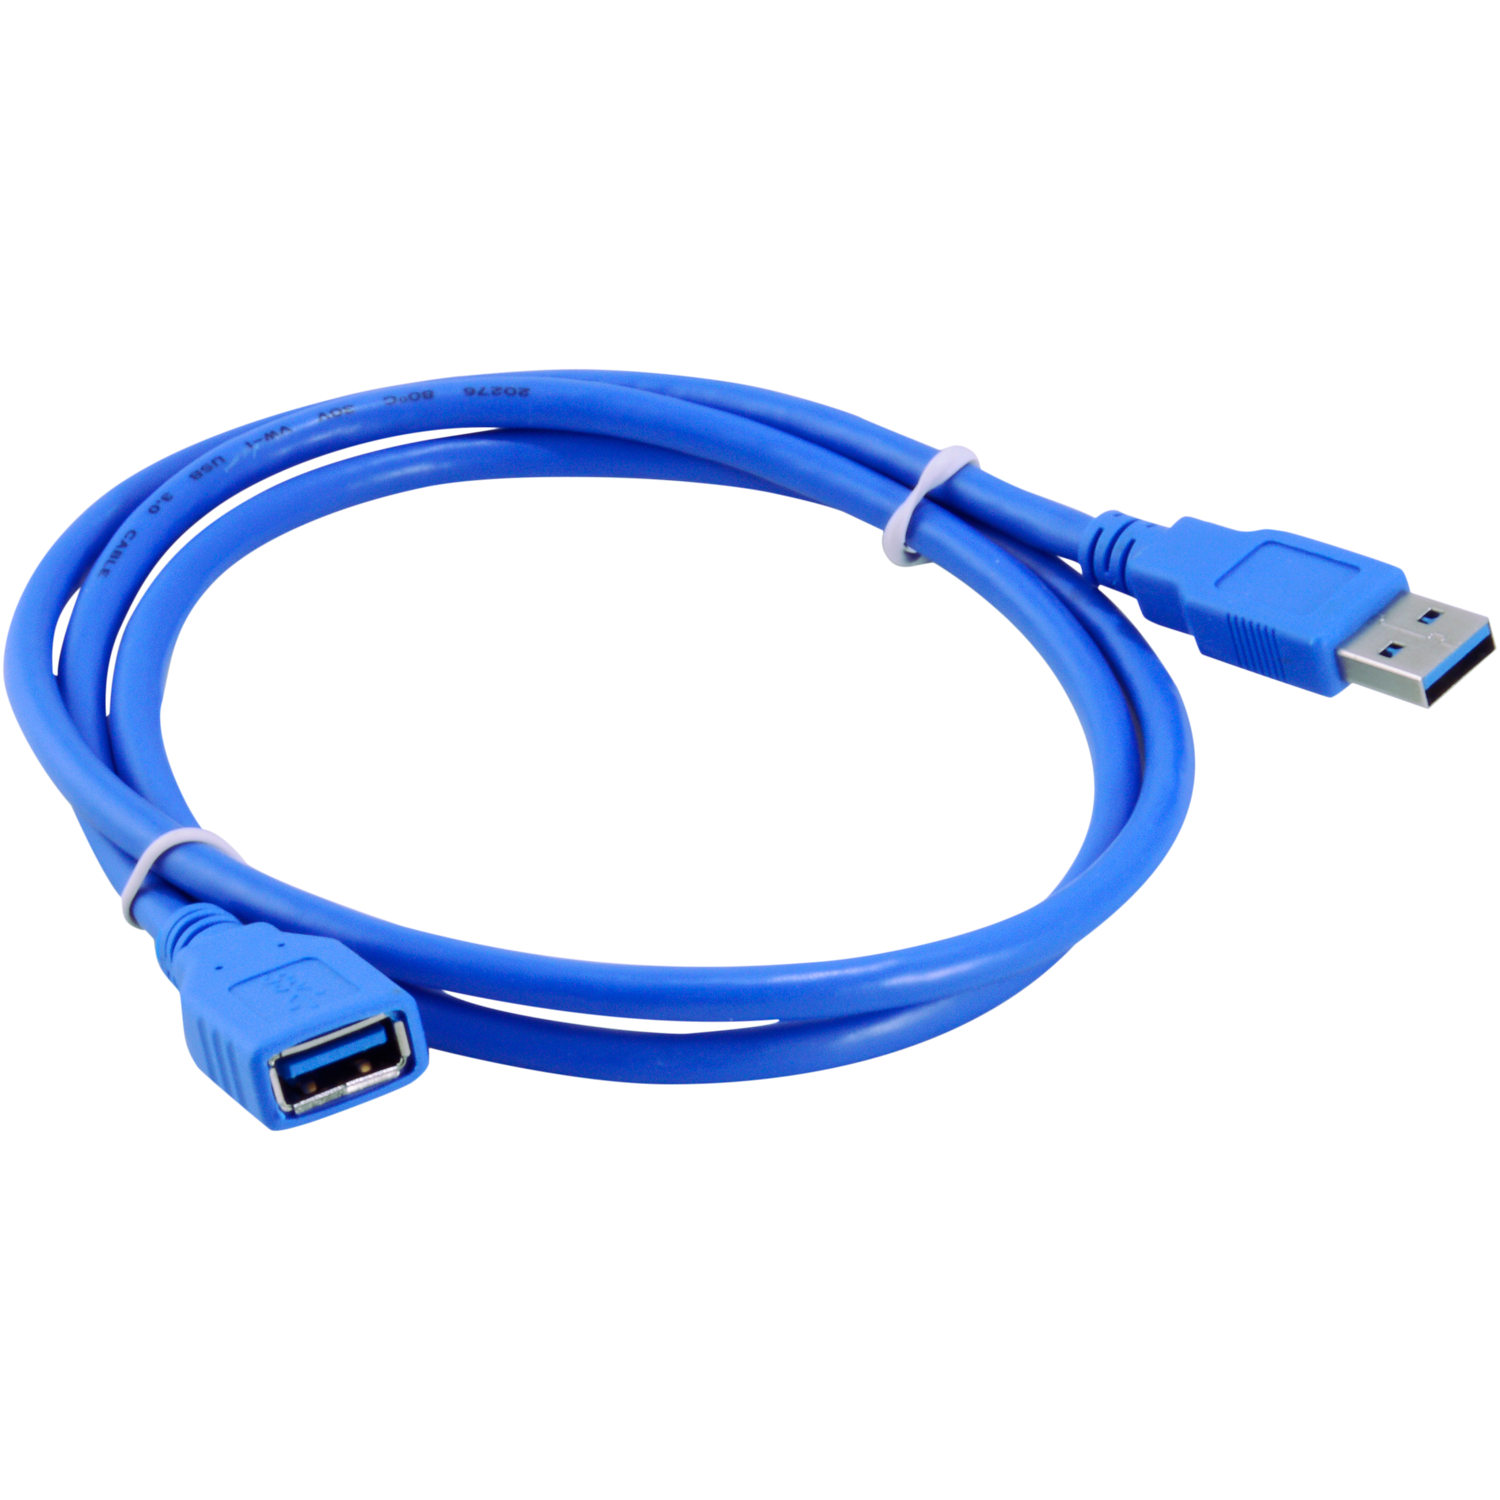 USB 3.0 A-Male to A-Female Extension Cable, 3 Feet / 1 Meter - $4.35 ...